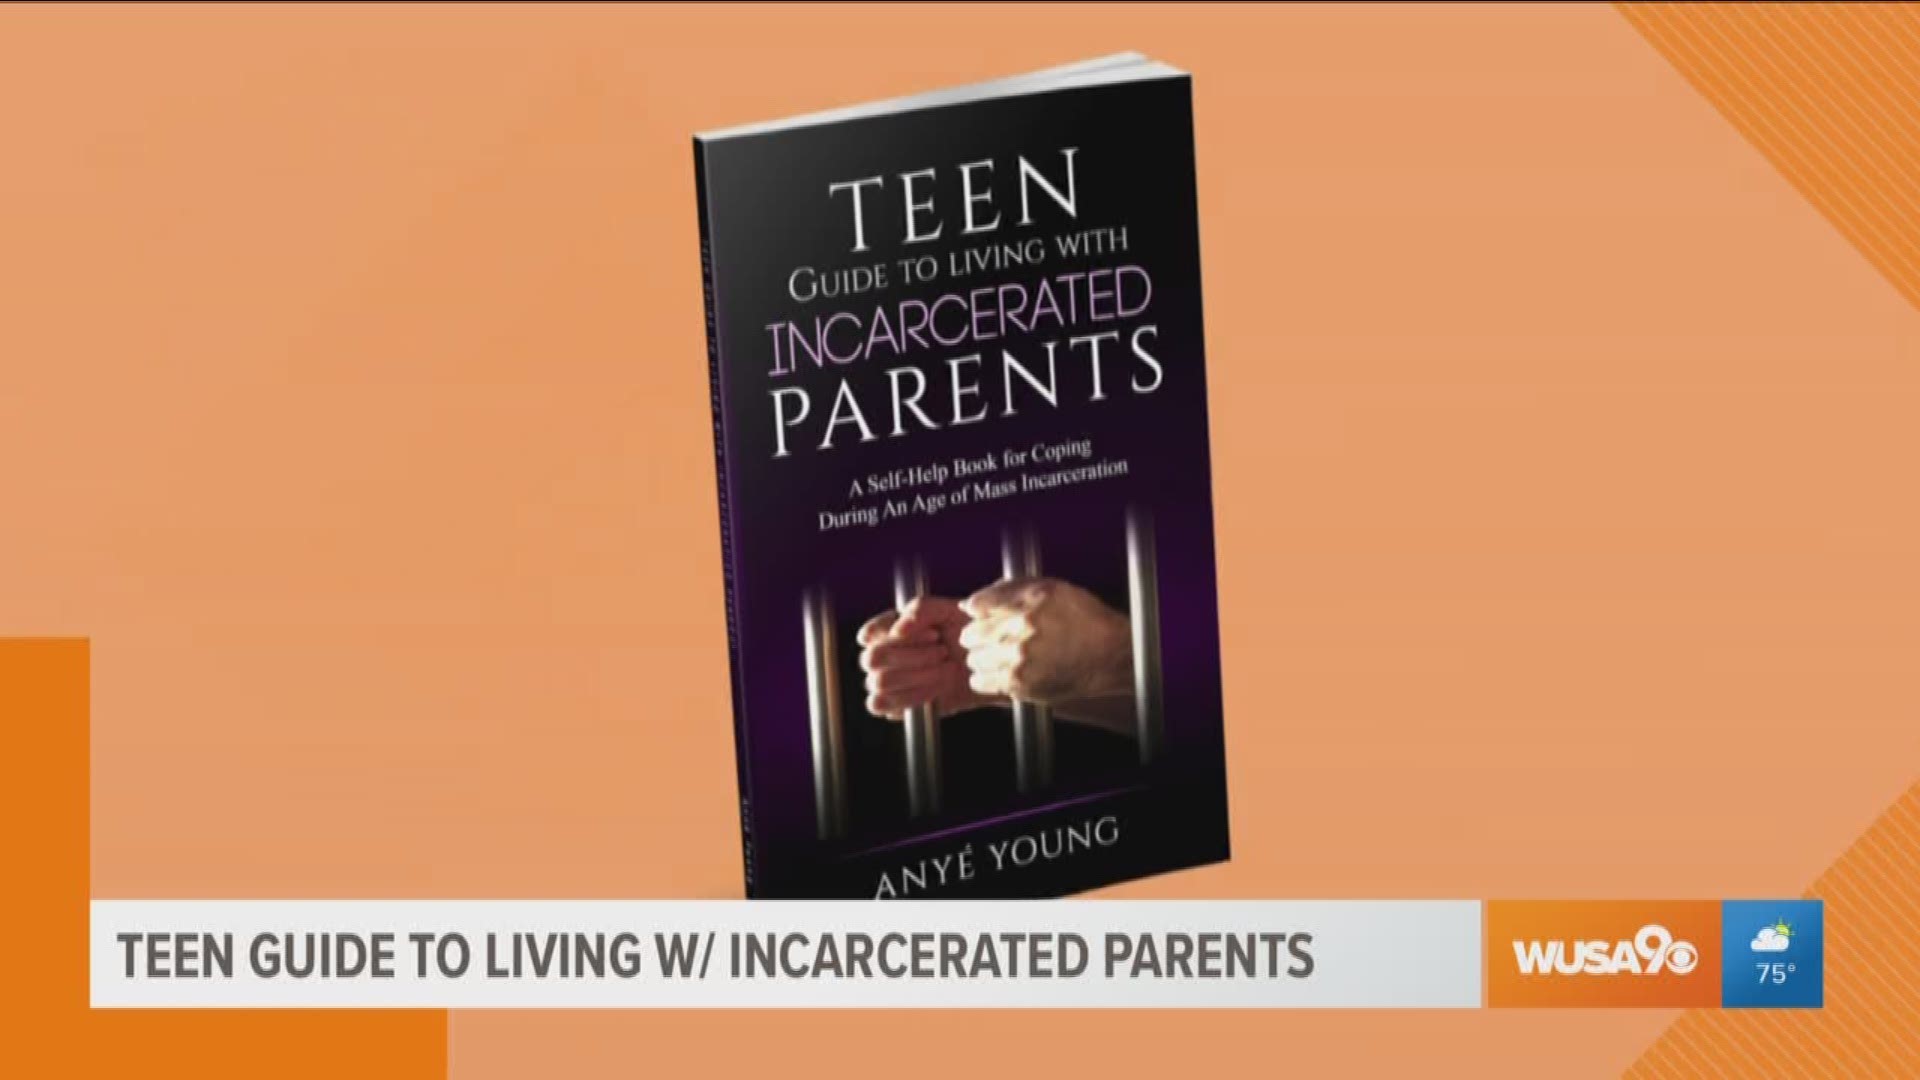 Teen author, Anyé Young and her mother, Ladána Drigo discuss what it was like growing up with an incarcerated parent and how it inspired Anyé to write a book about the difficult subject.